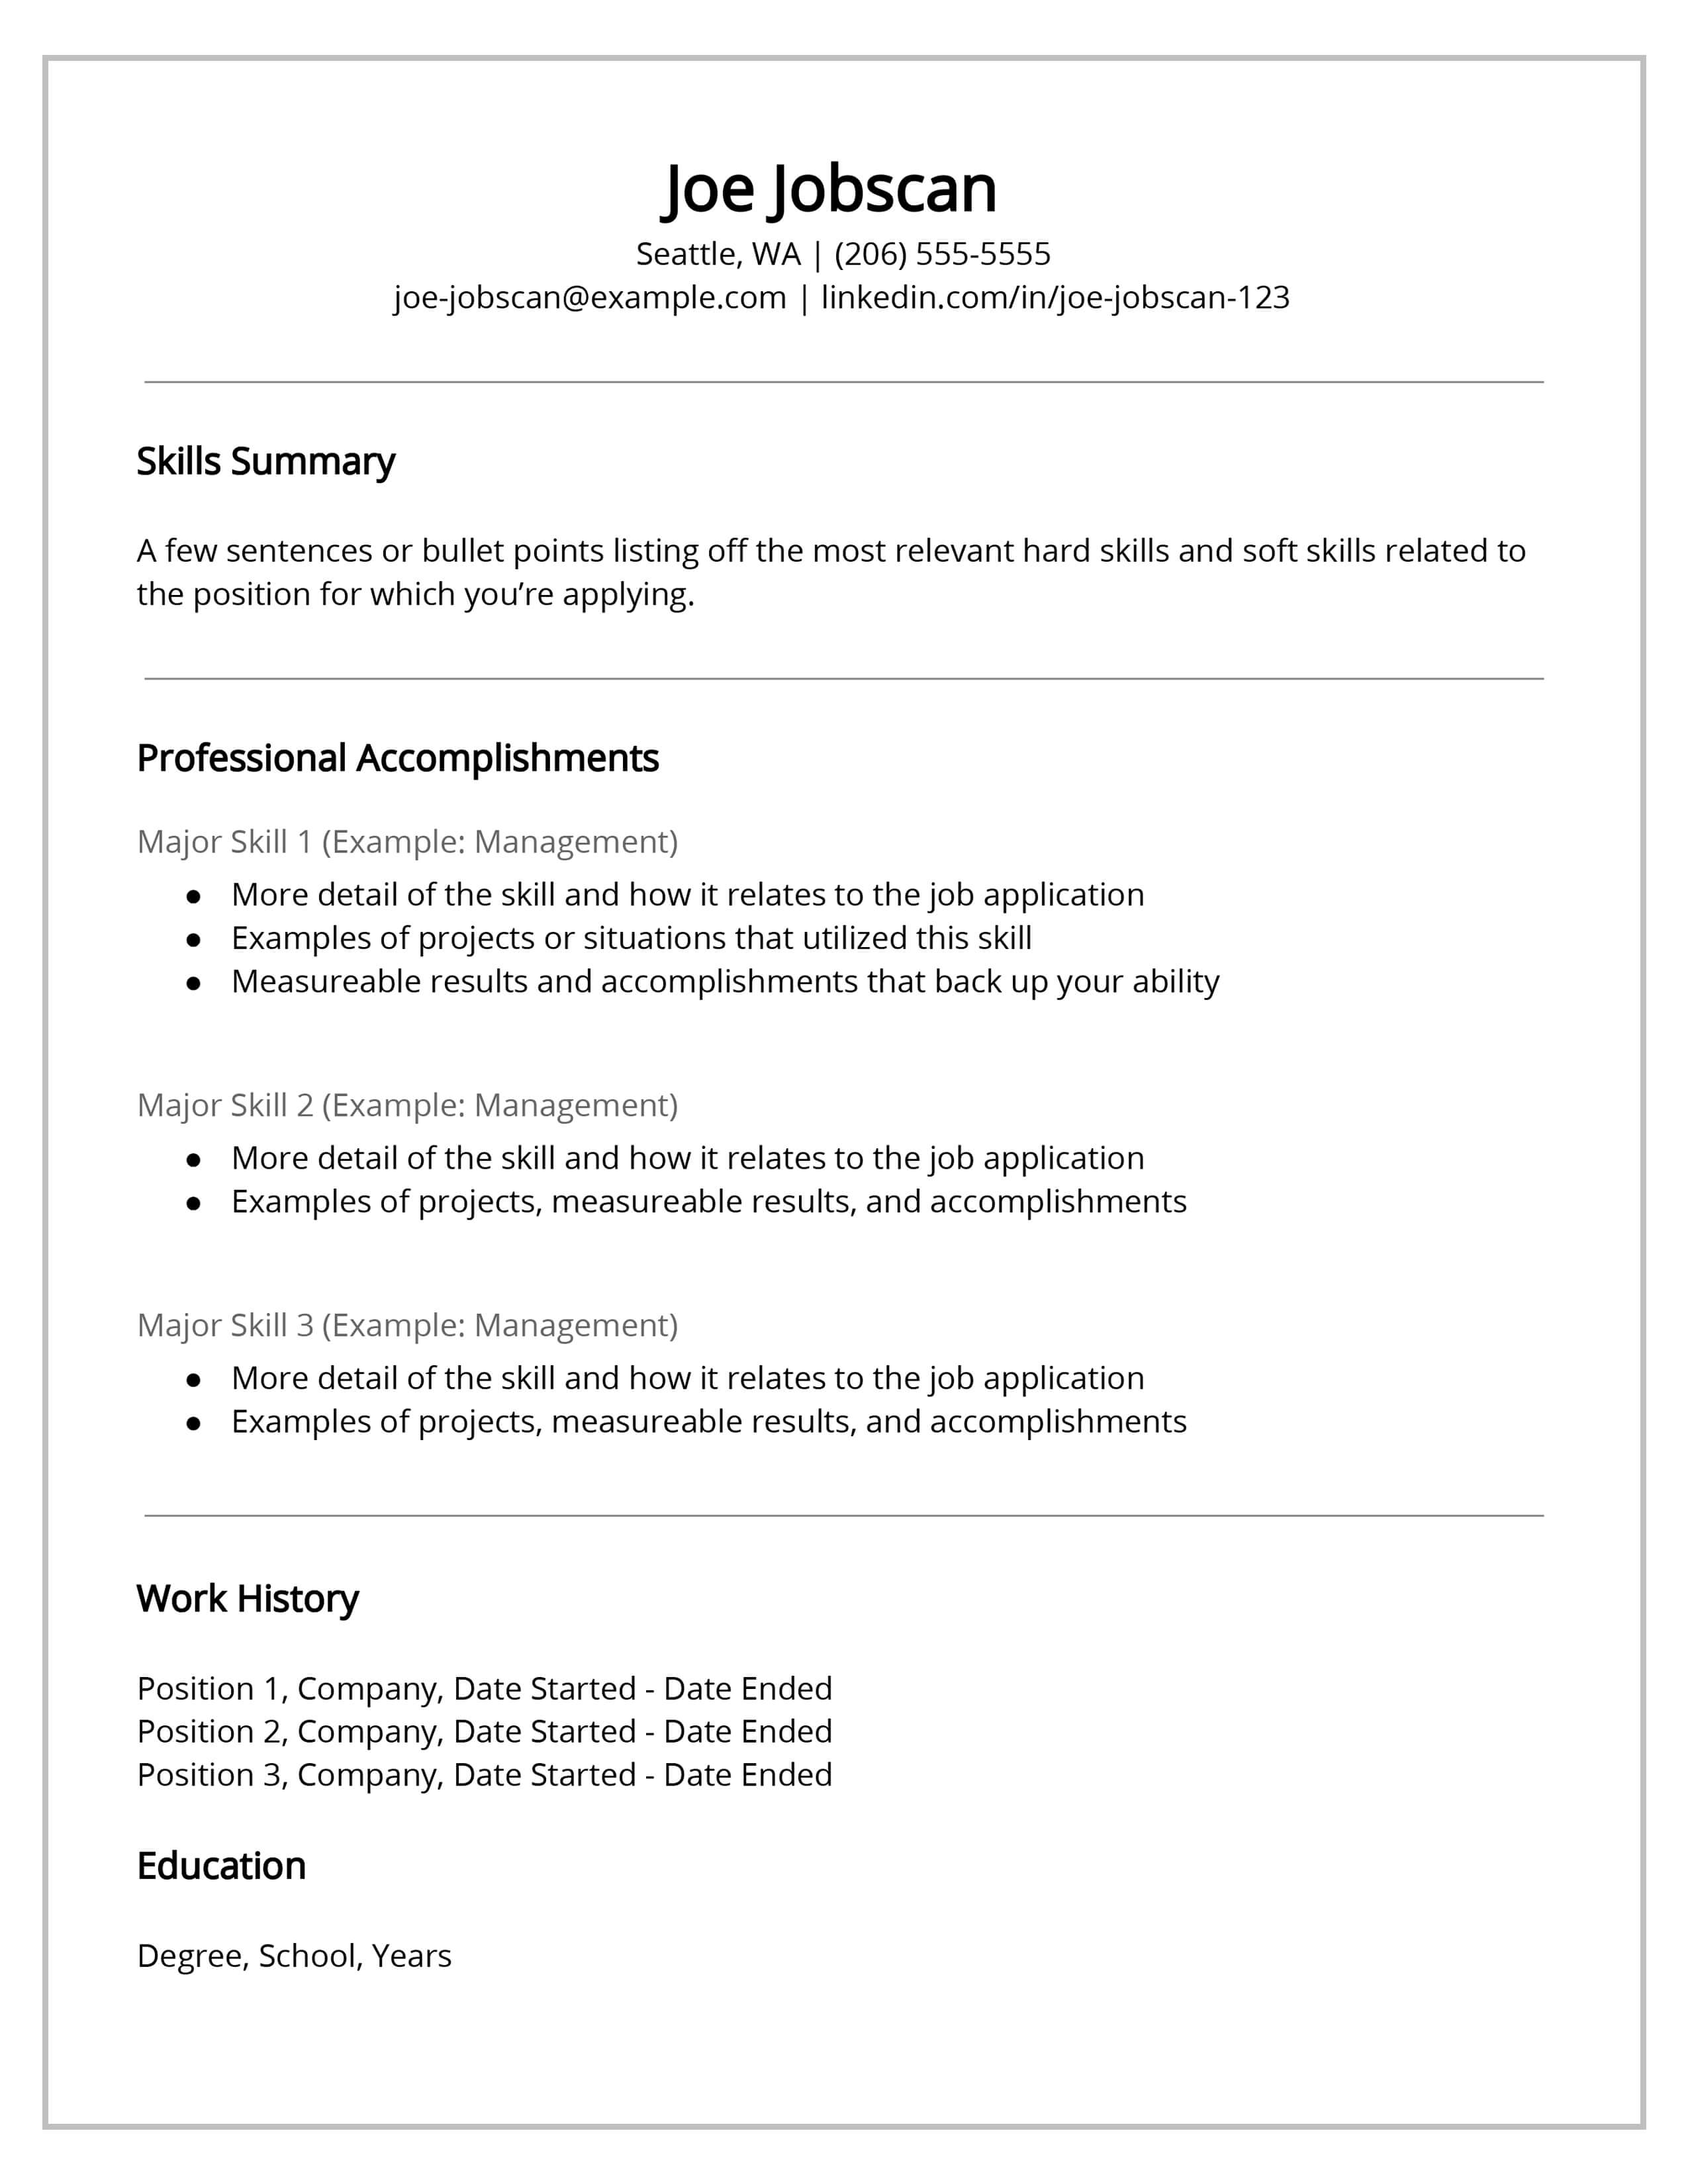 Recruiters Hate The Functional Resume Format Here S Why